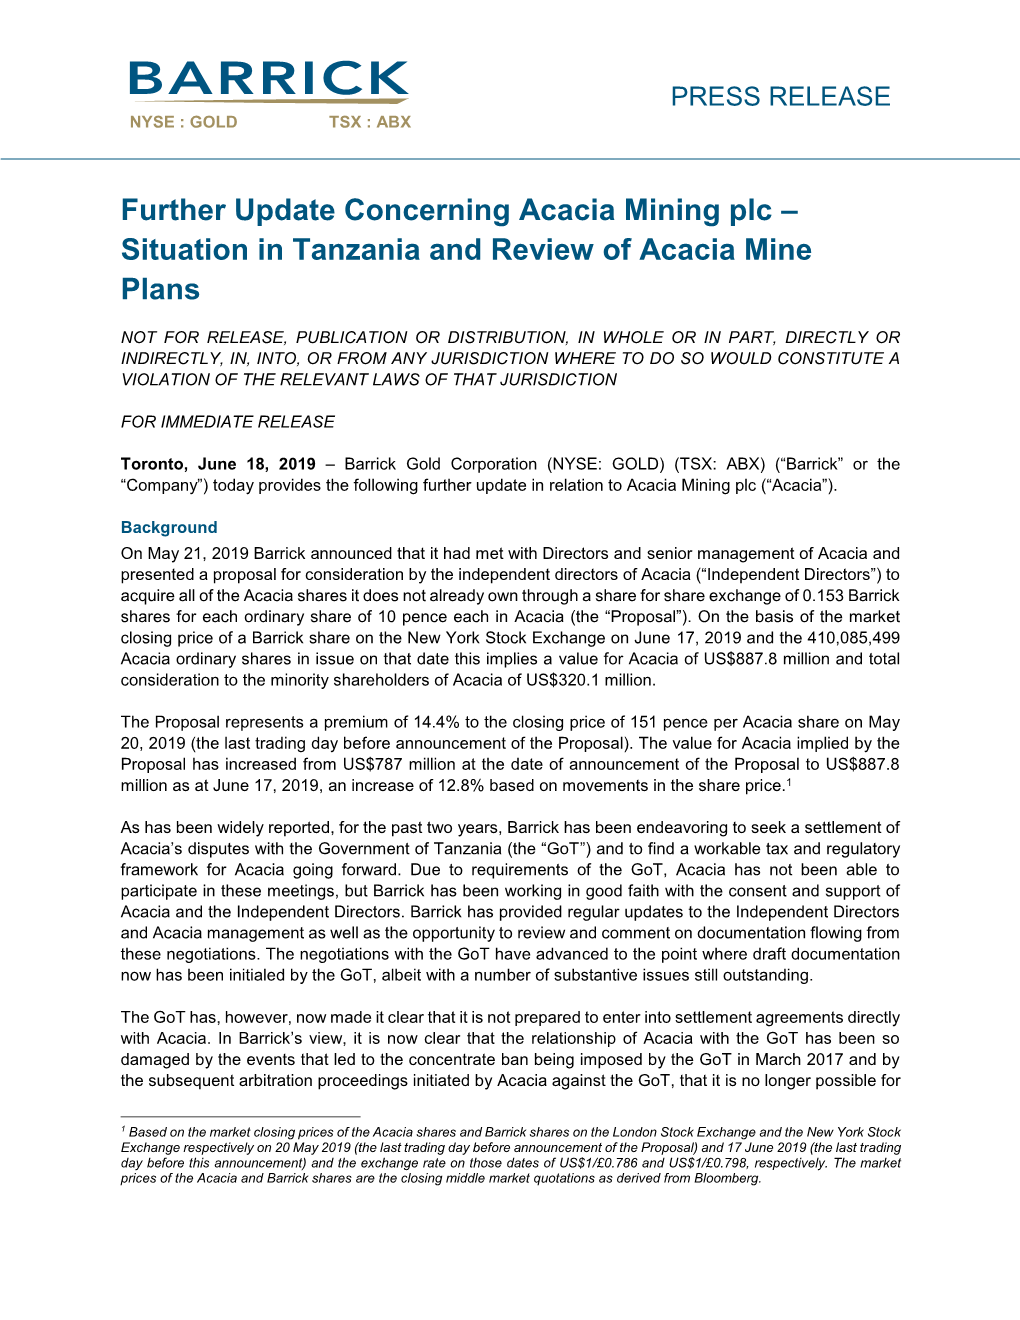 Acacia Mining Plc – Situation in Tanzania and Review of Acacia Mine Plans